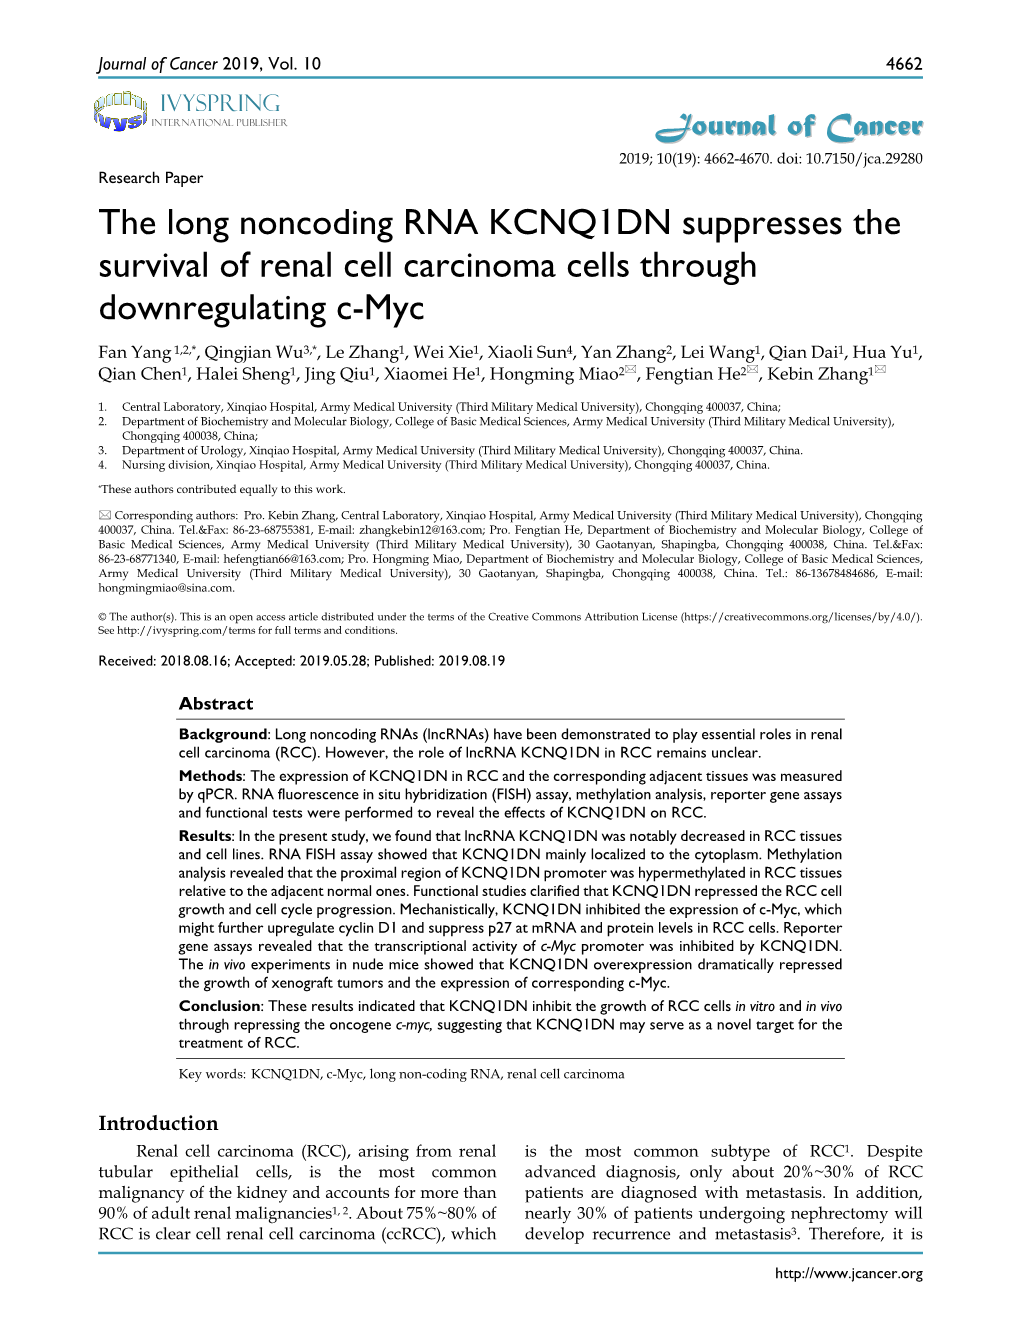 The Long Noncoding RNA KCNQ1DN Suppresses the Survival of Renal Cell